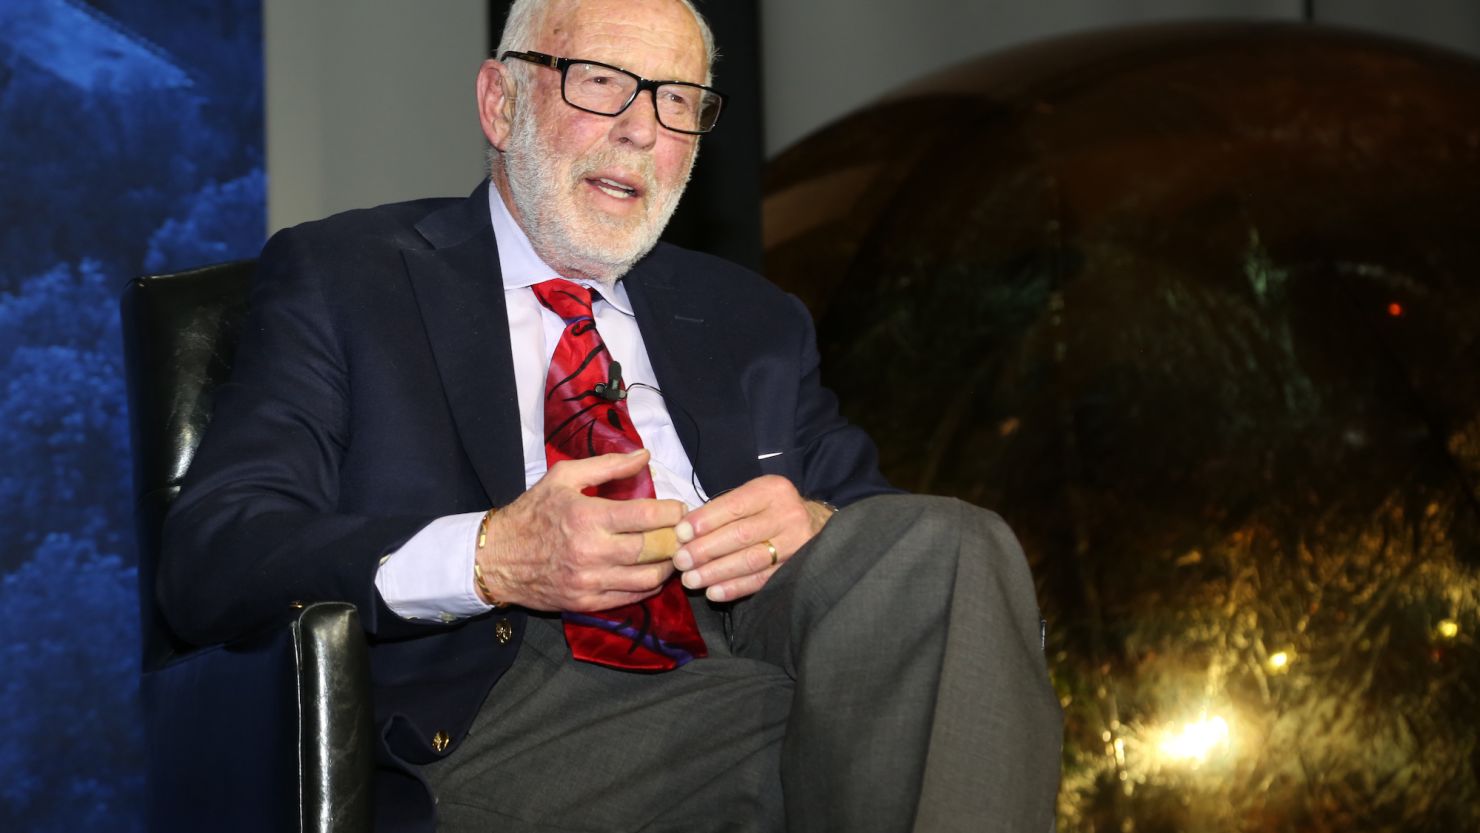 Jim Simons attends IAS Einstein Gala honoring Jim Simons at Pier 60 at Chelsea Piers on March 14, 2019 in New York City.